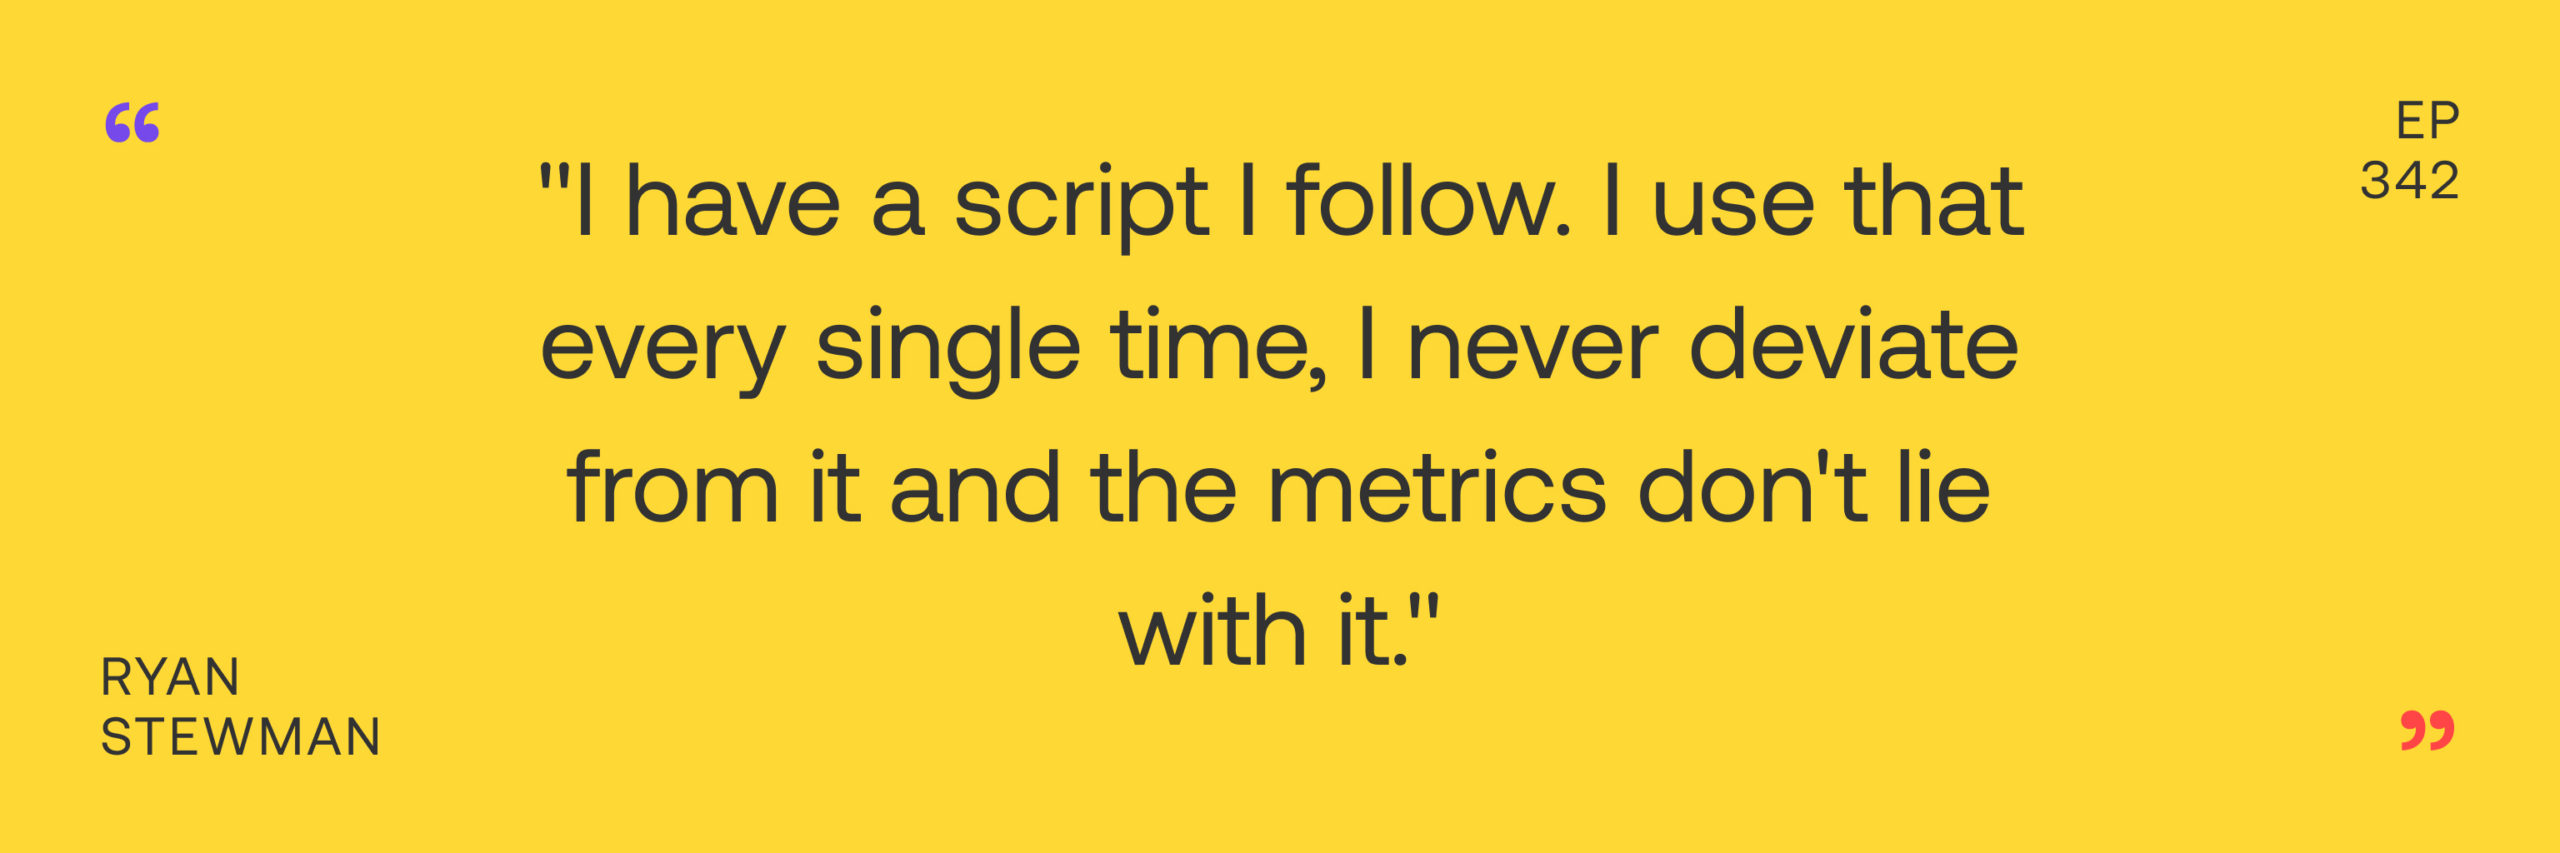 ryan stewman quote about sales scripts